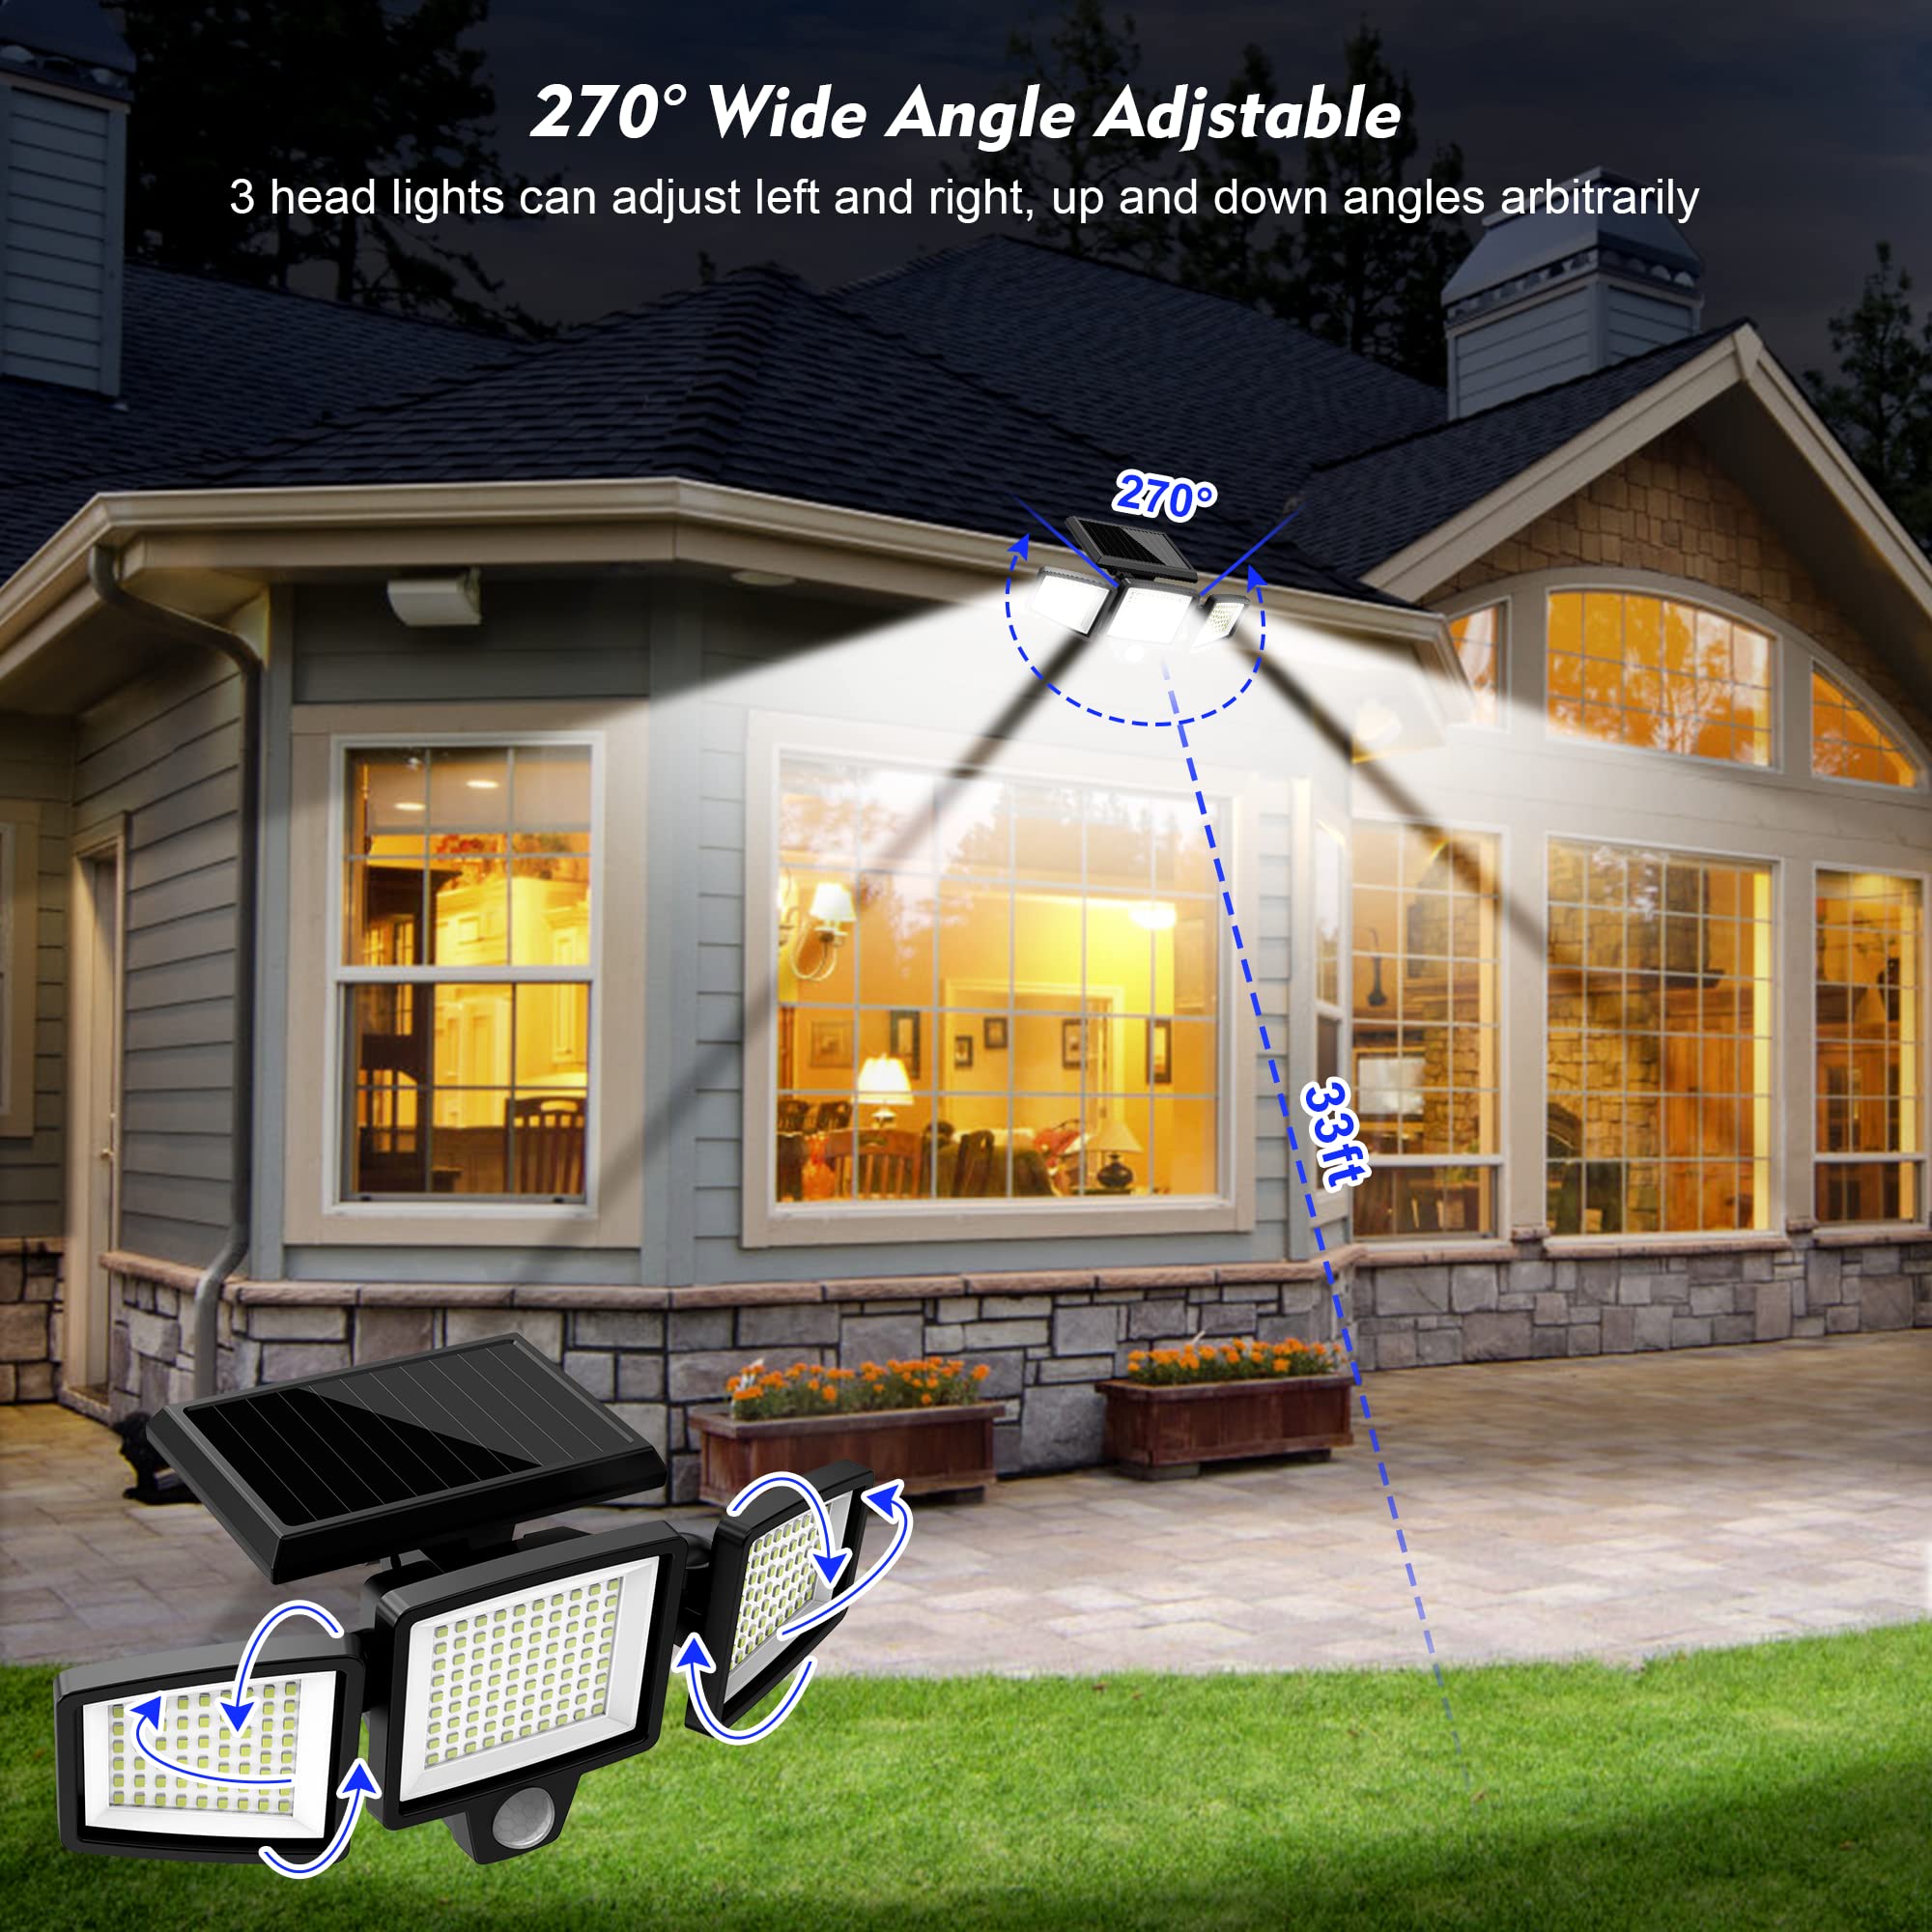 WWimy Solar Lights Outdoor, 210 LED 2500LM Motion Sensor with Remote Control, 3 Heads Security Flood Lights, IP65 Waterproof, 270° Wide Angle Illumination Wall Modes(2 Packs)